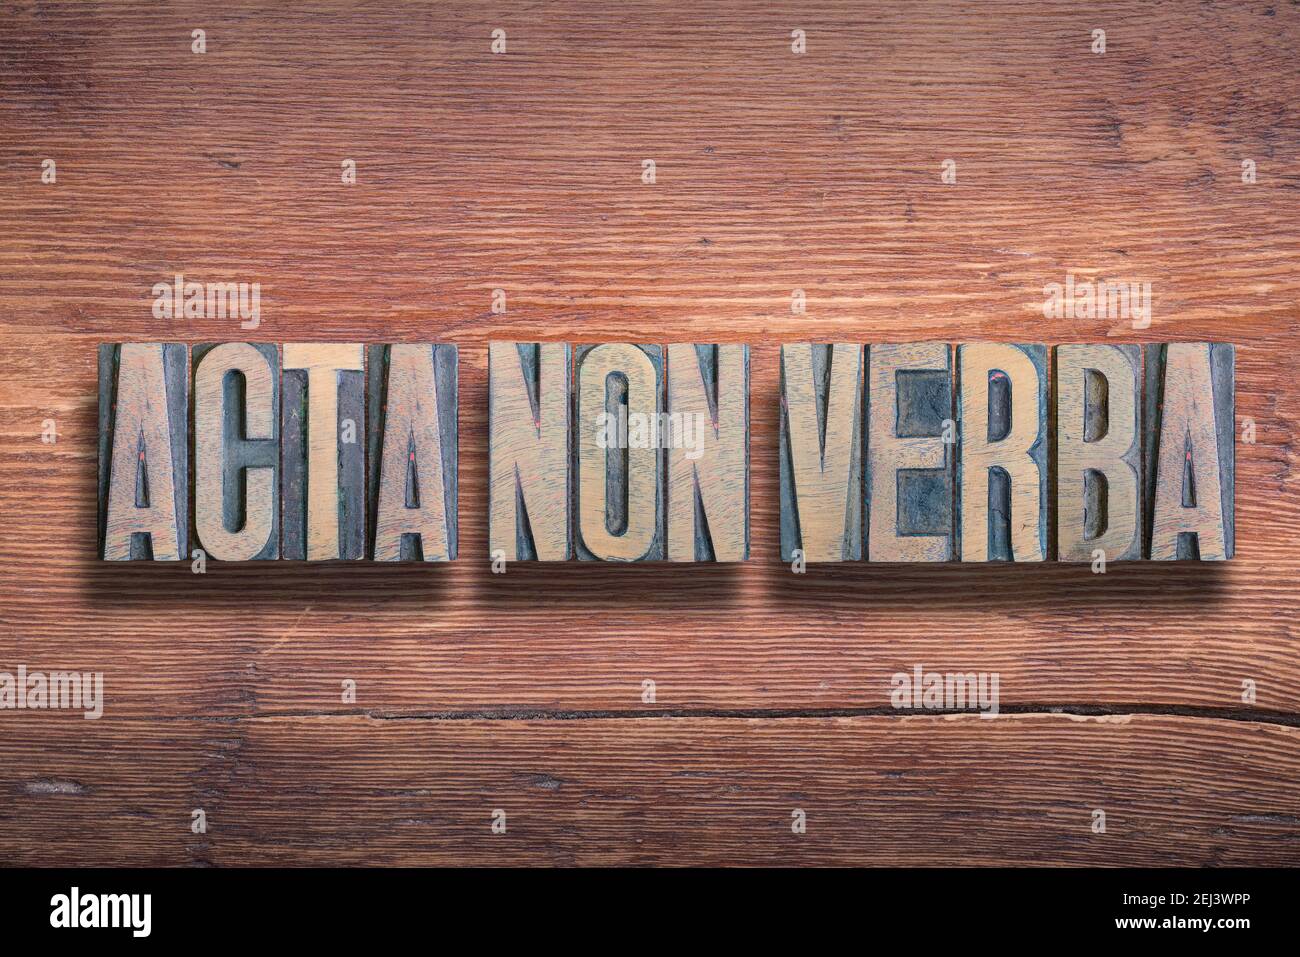 acta non verba ancient Latin saying meaning «deeds, not words» combined on vintage varnished wooden surface Stock Photo